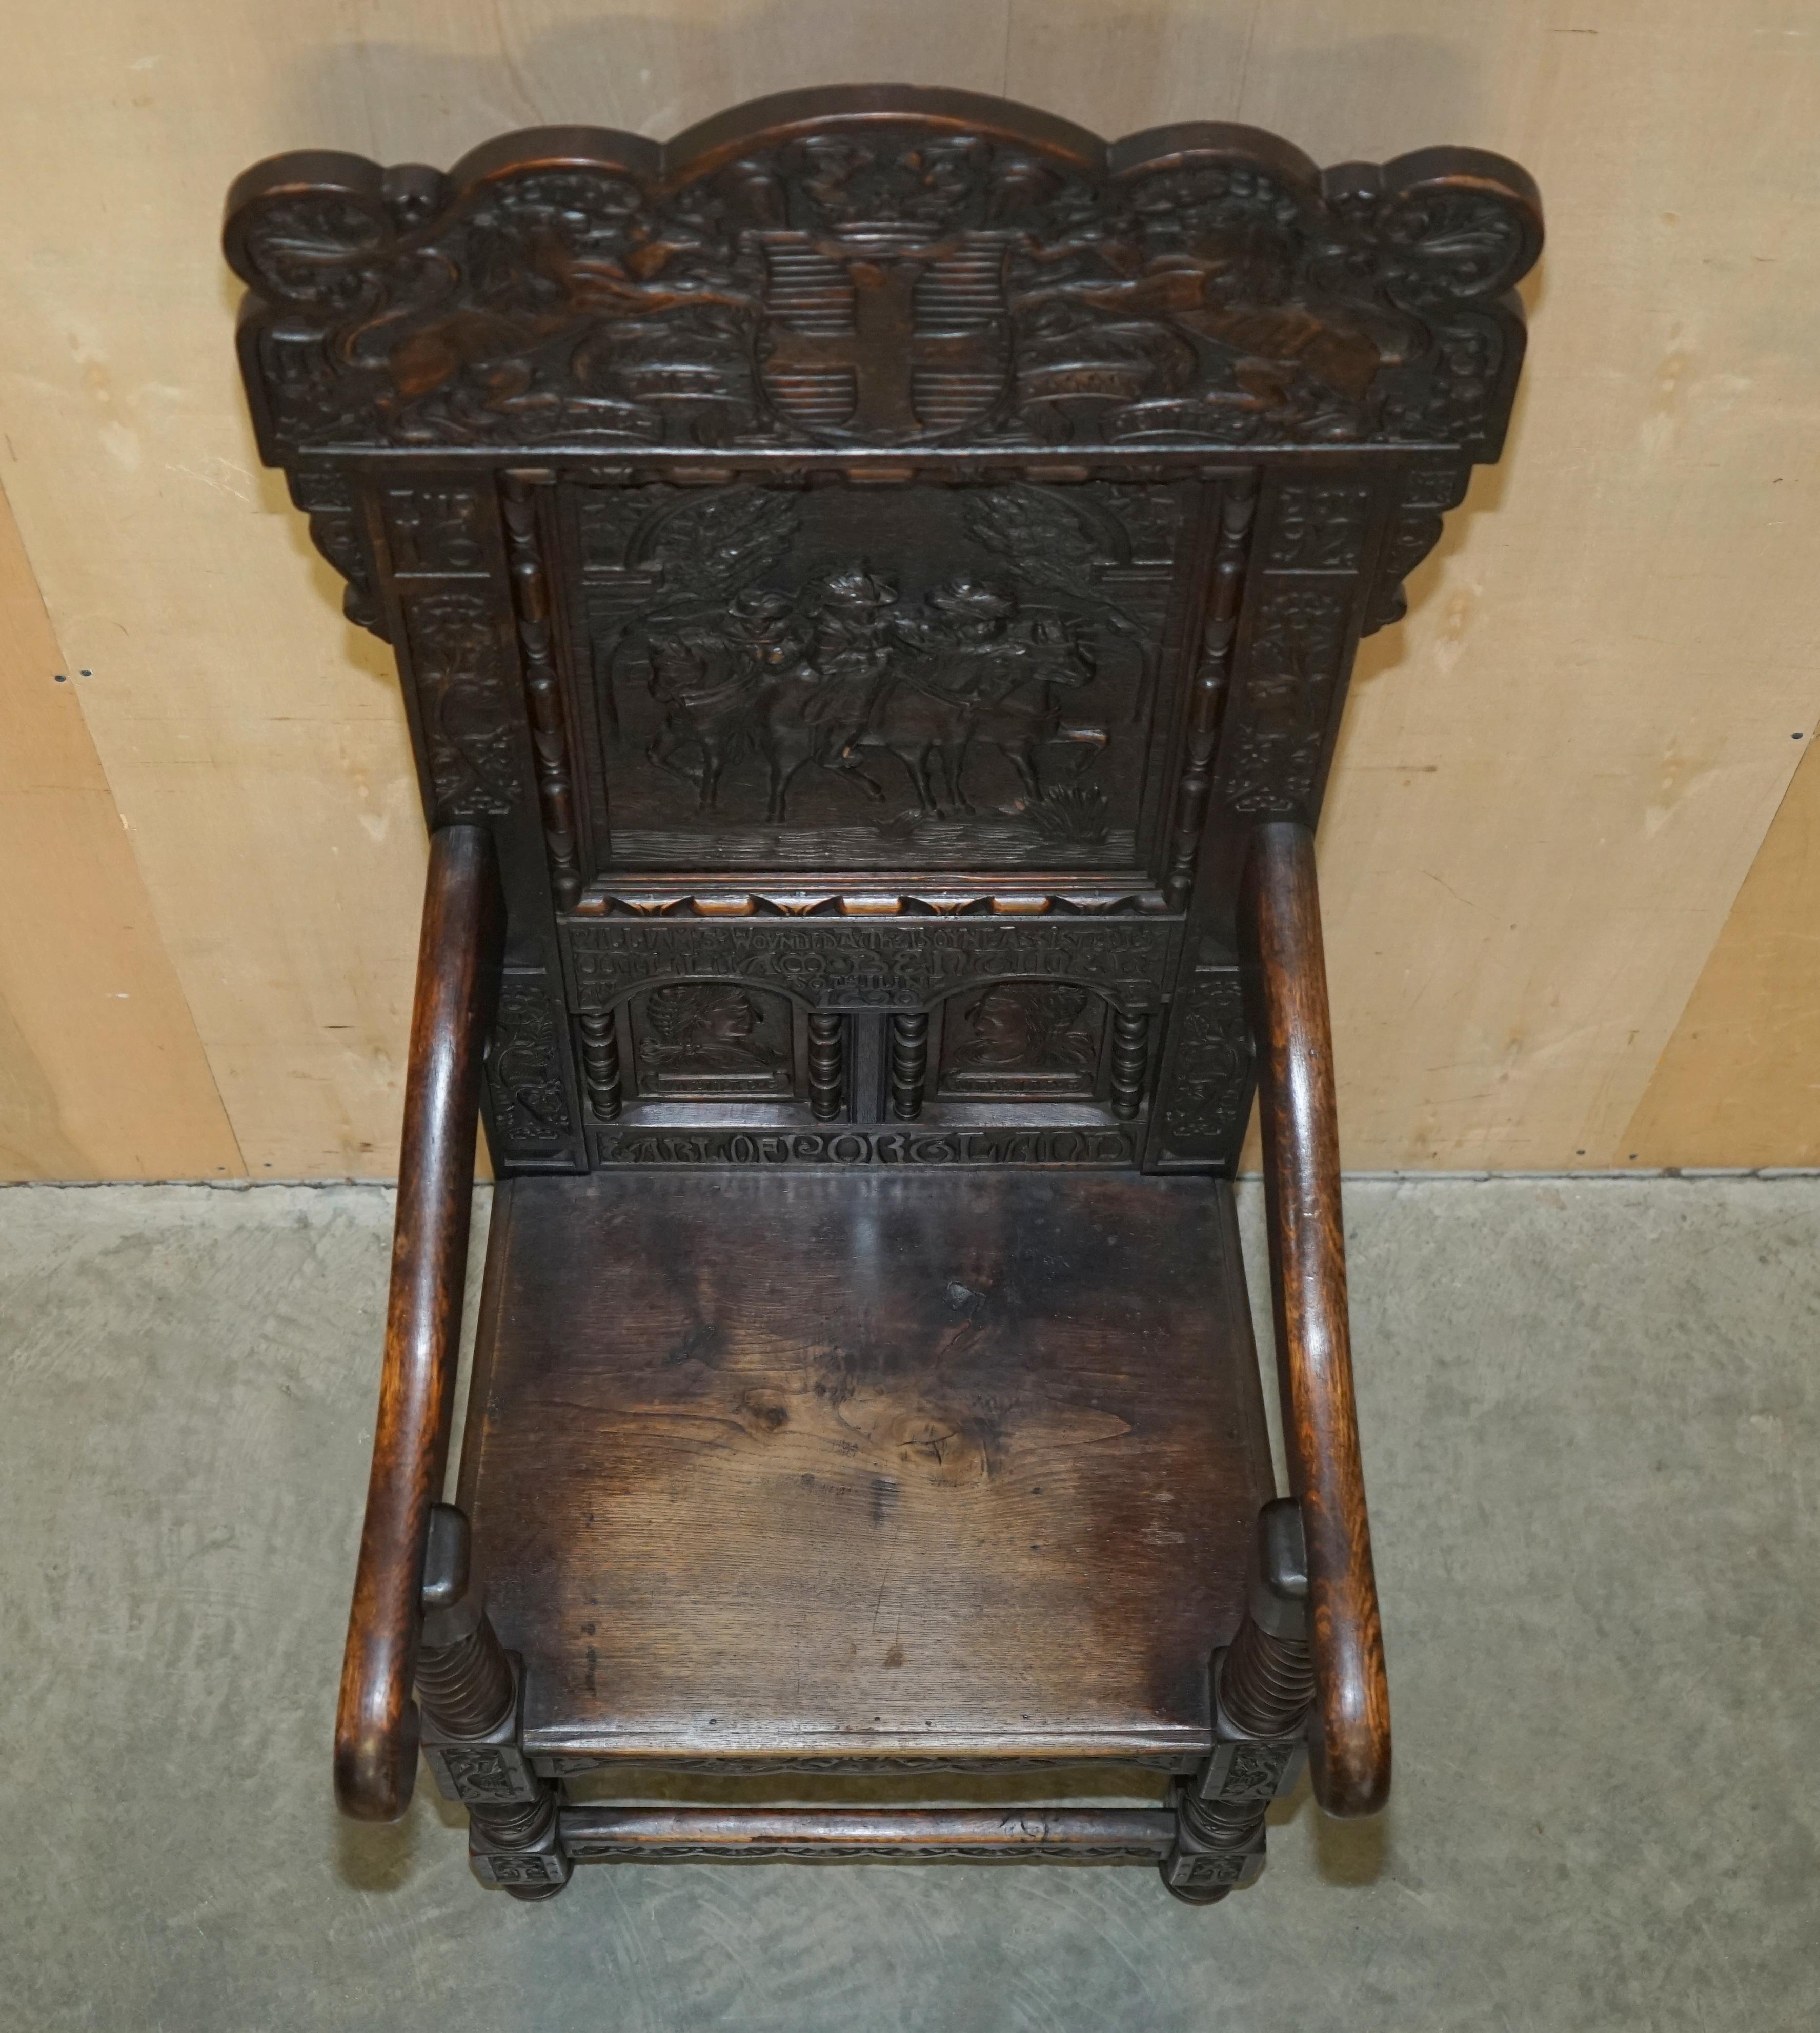 Carved 1690 Dated Commemorative Wainscot Armchair William III Earl of Portland 9